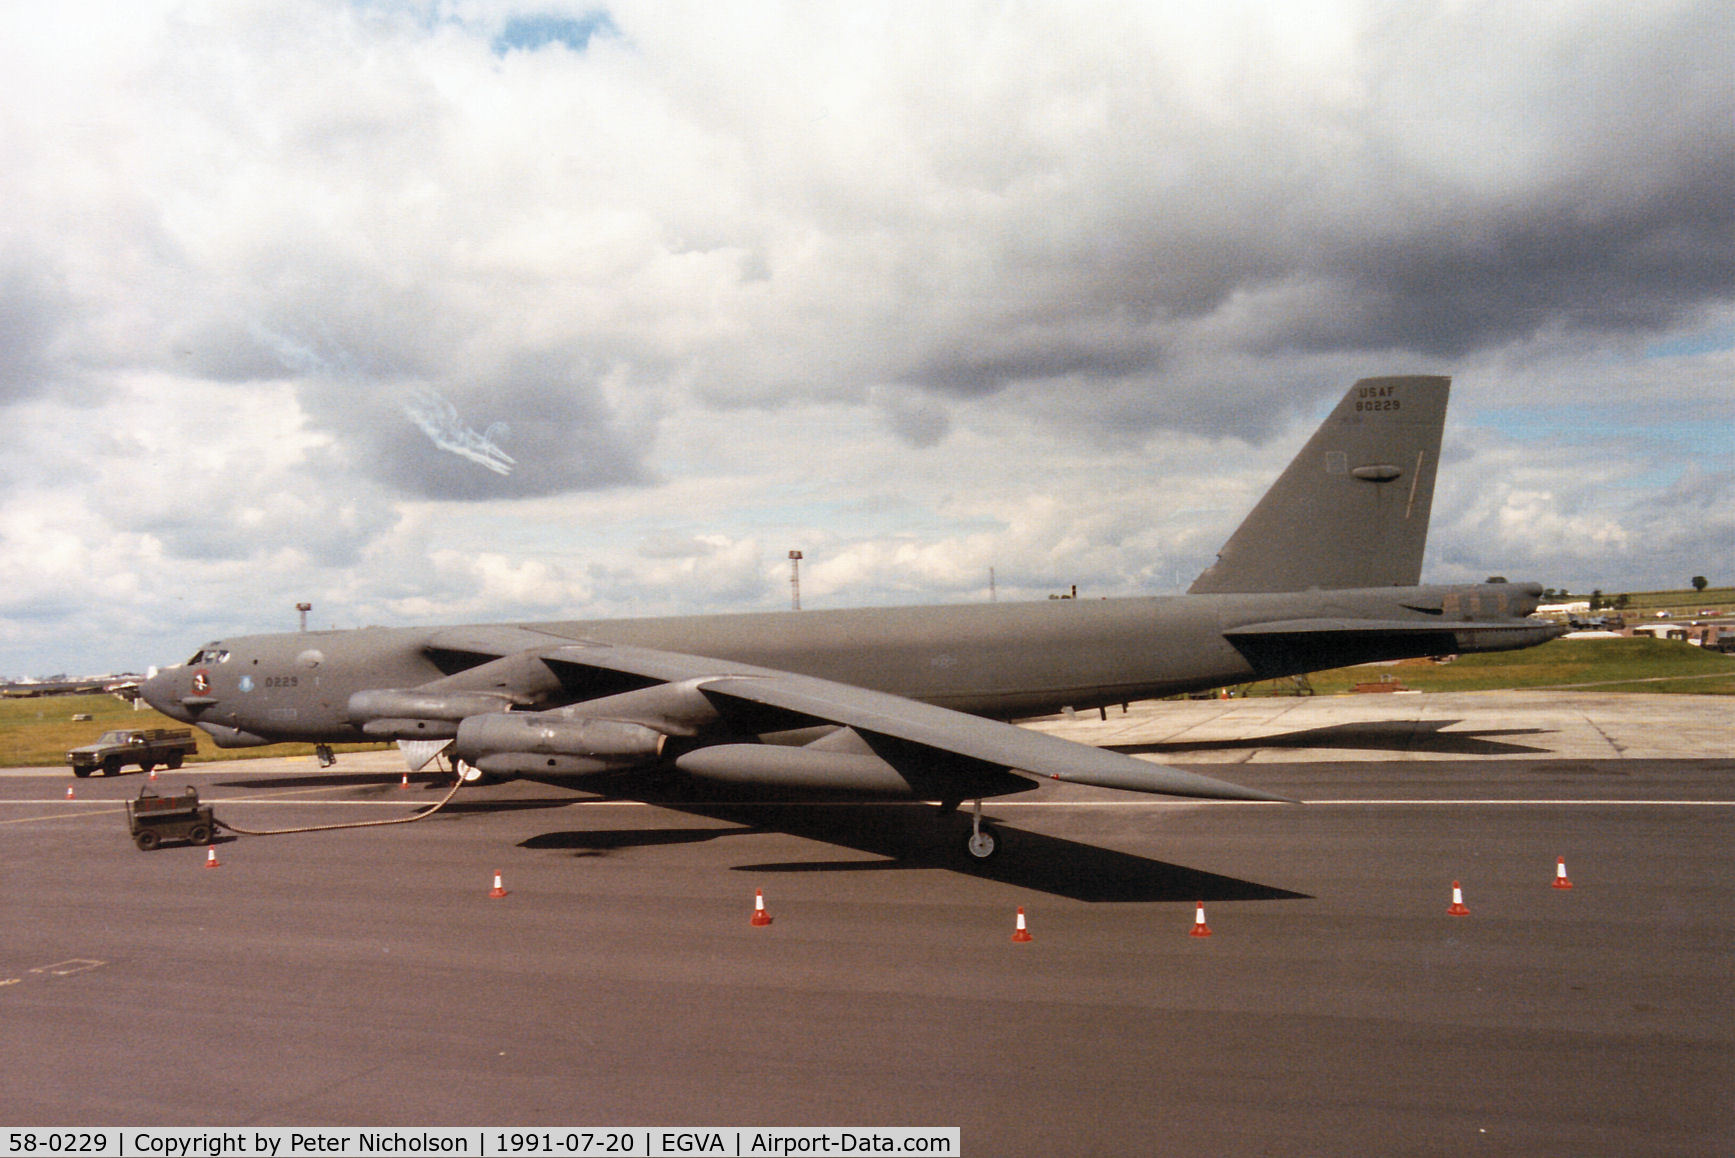 58-0229, 1958 Boeing B-52G Stratofortress C/N 464297, B-52G Stratofortress, callsign Shiva 31,  of 340th Bomb Squadron,97th Bomb Wing at Eaker AFB on display at the 1991 Intnl Air Tattoo at RAF Fairford.